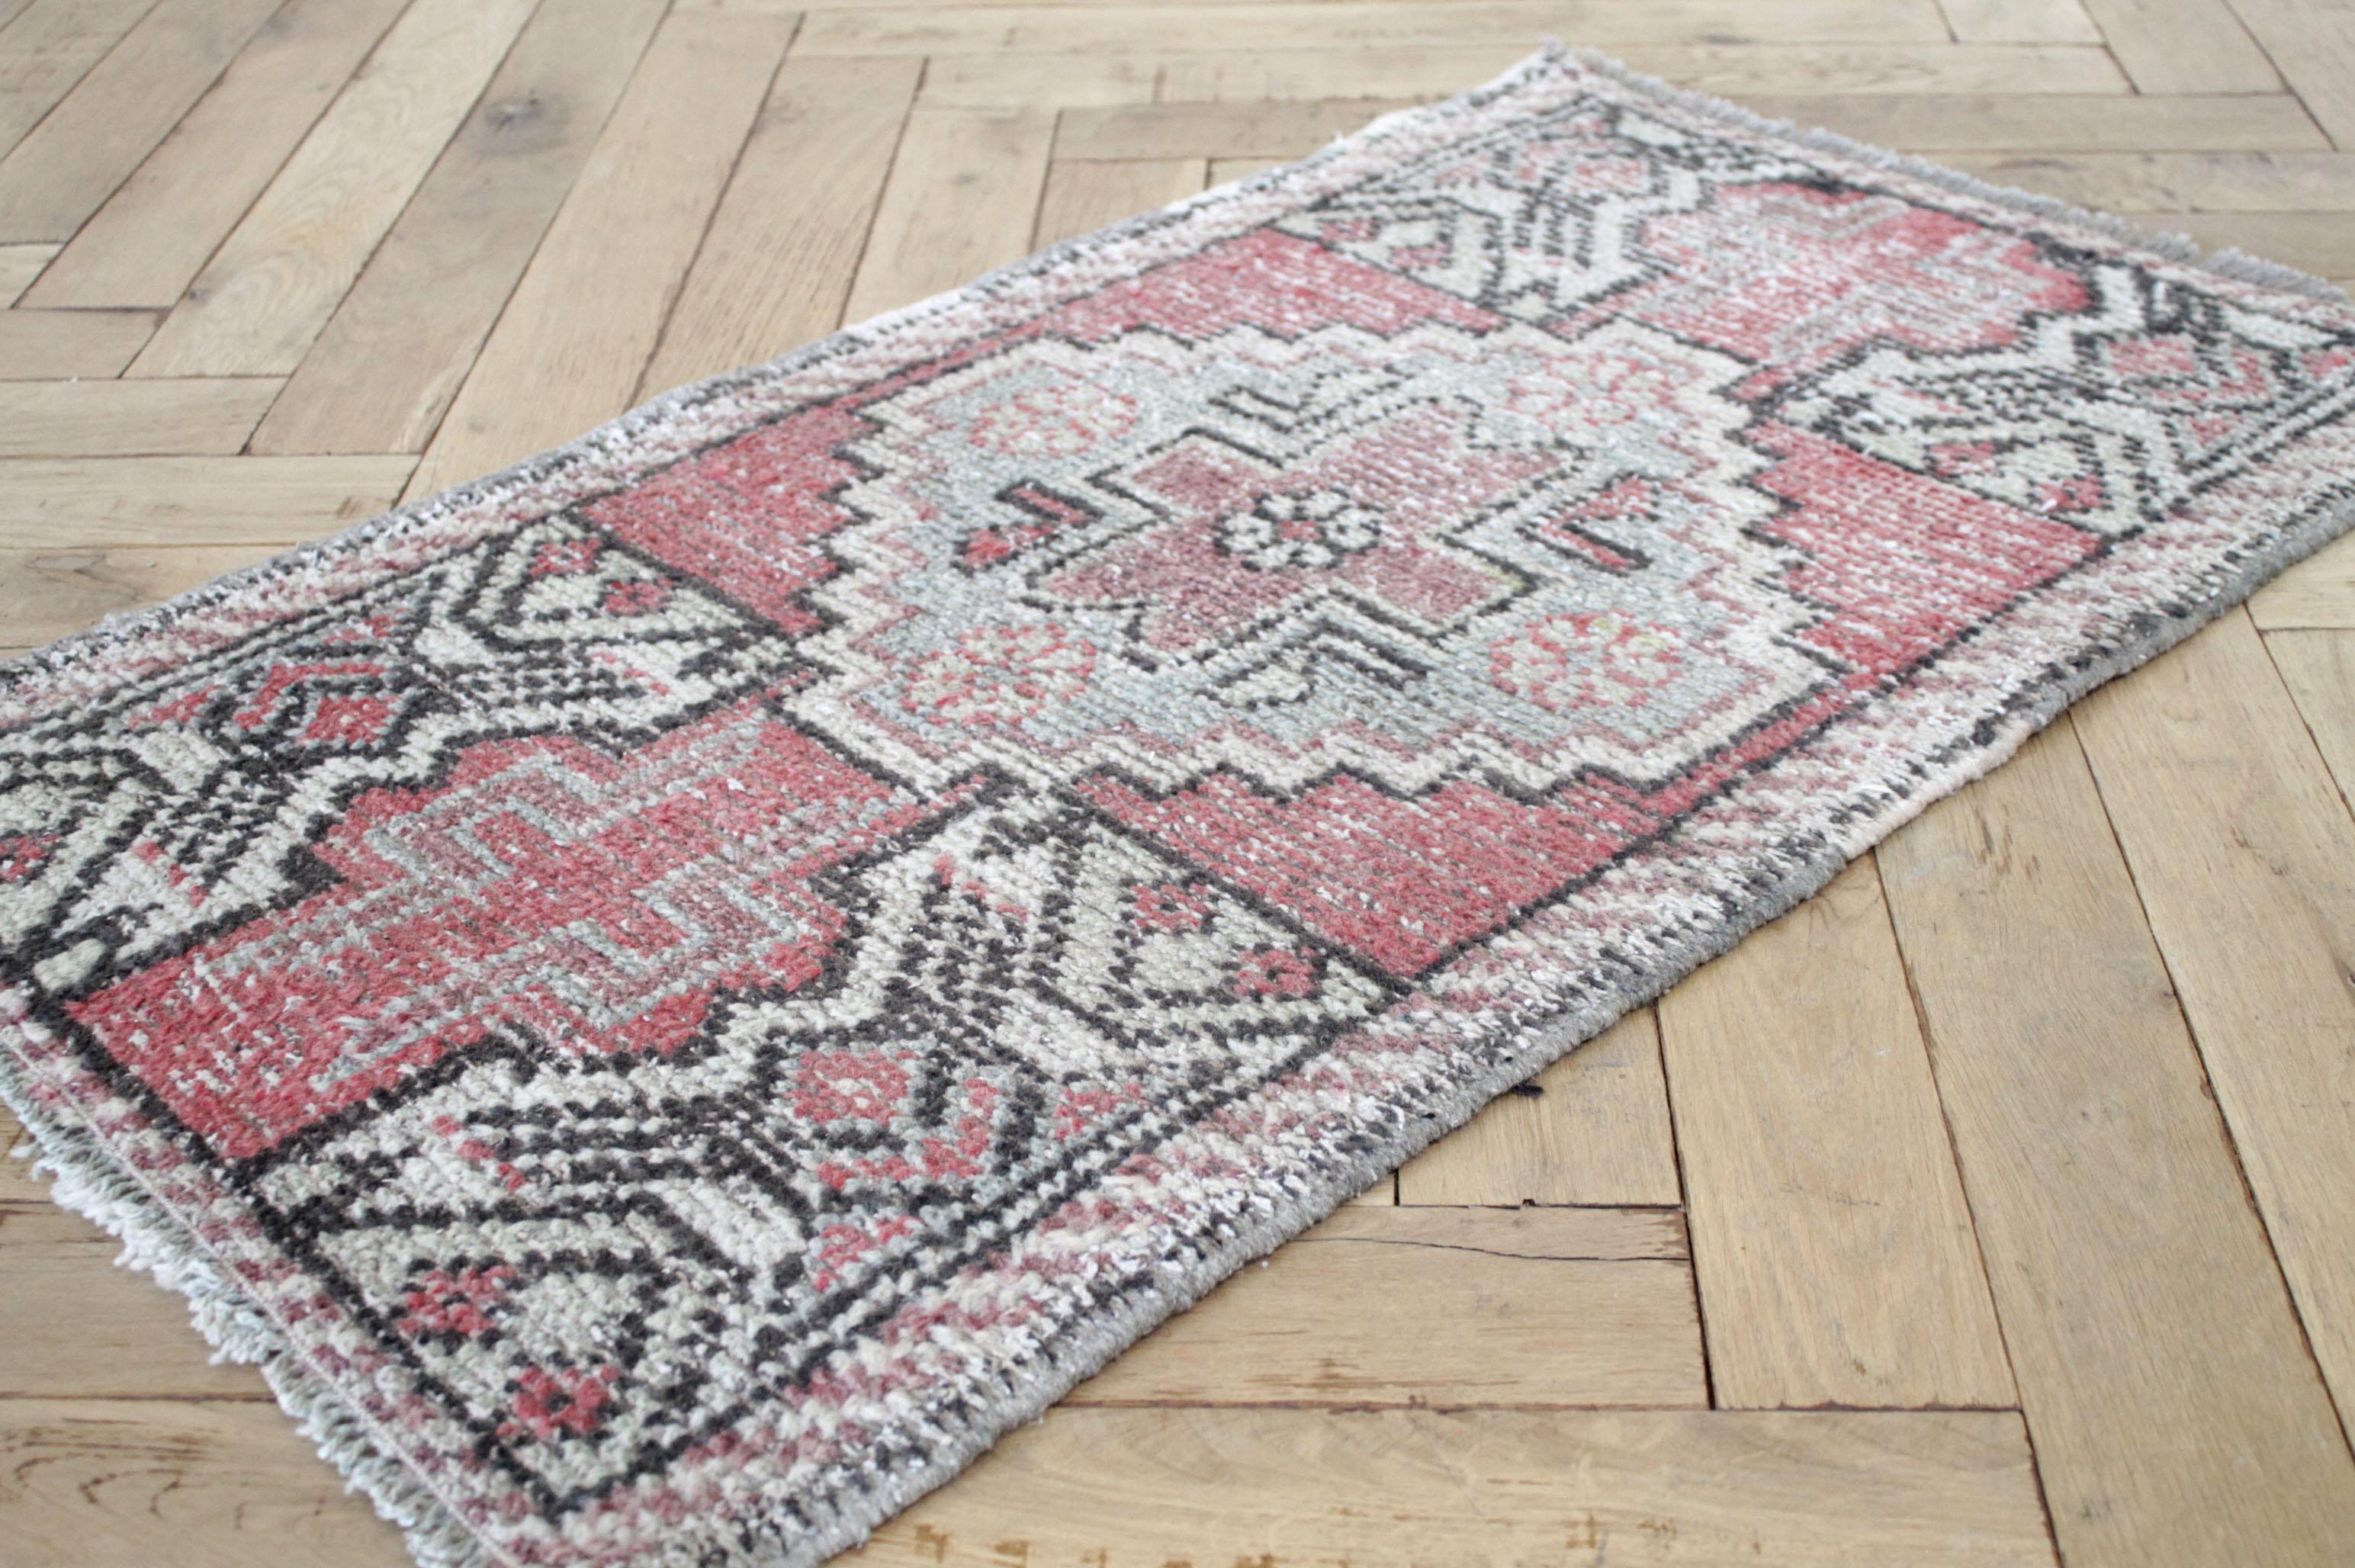 Small vintage Turkish accent rug
Measures: 19